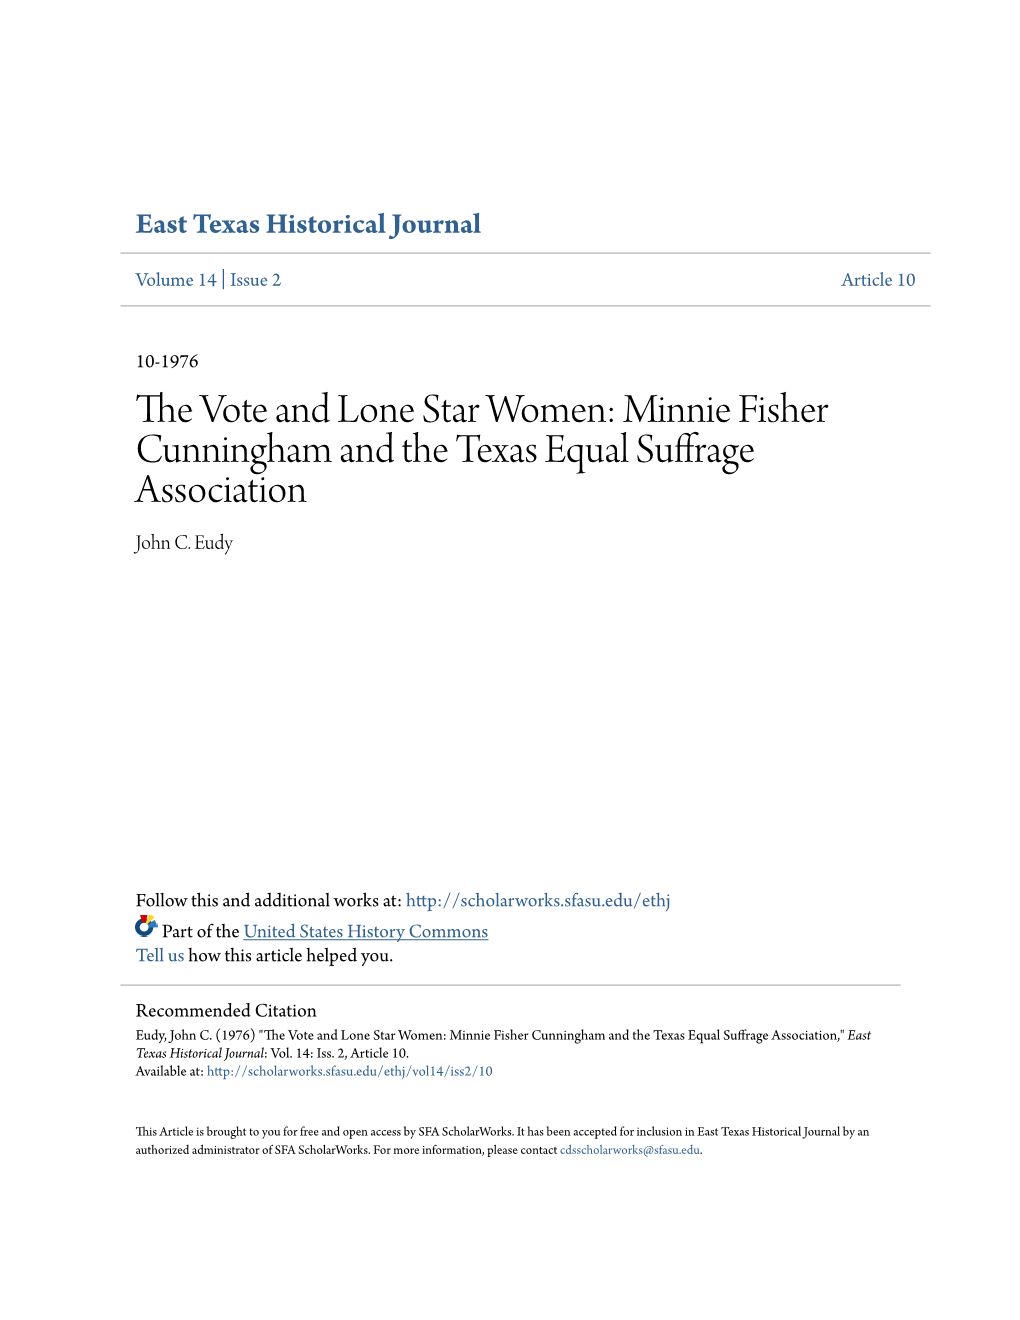 Minnie Fisher Cunningham and the Texas Equal Suffrage Association John C